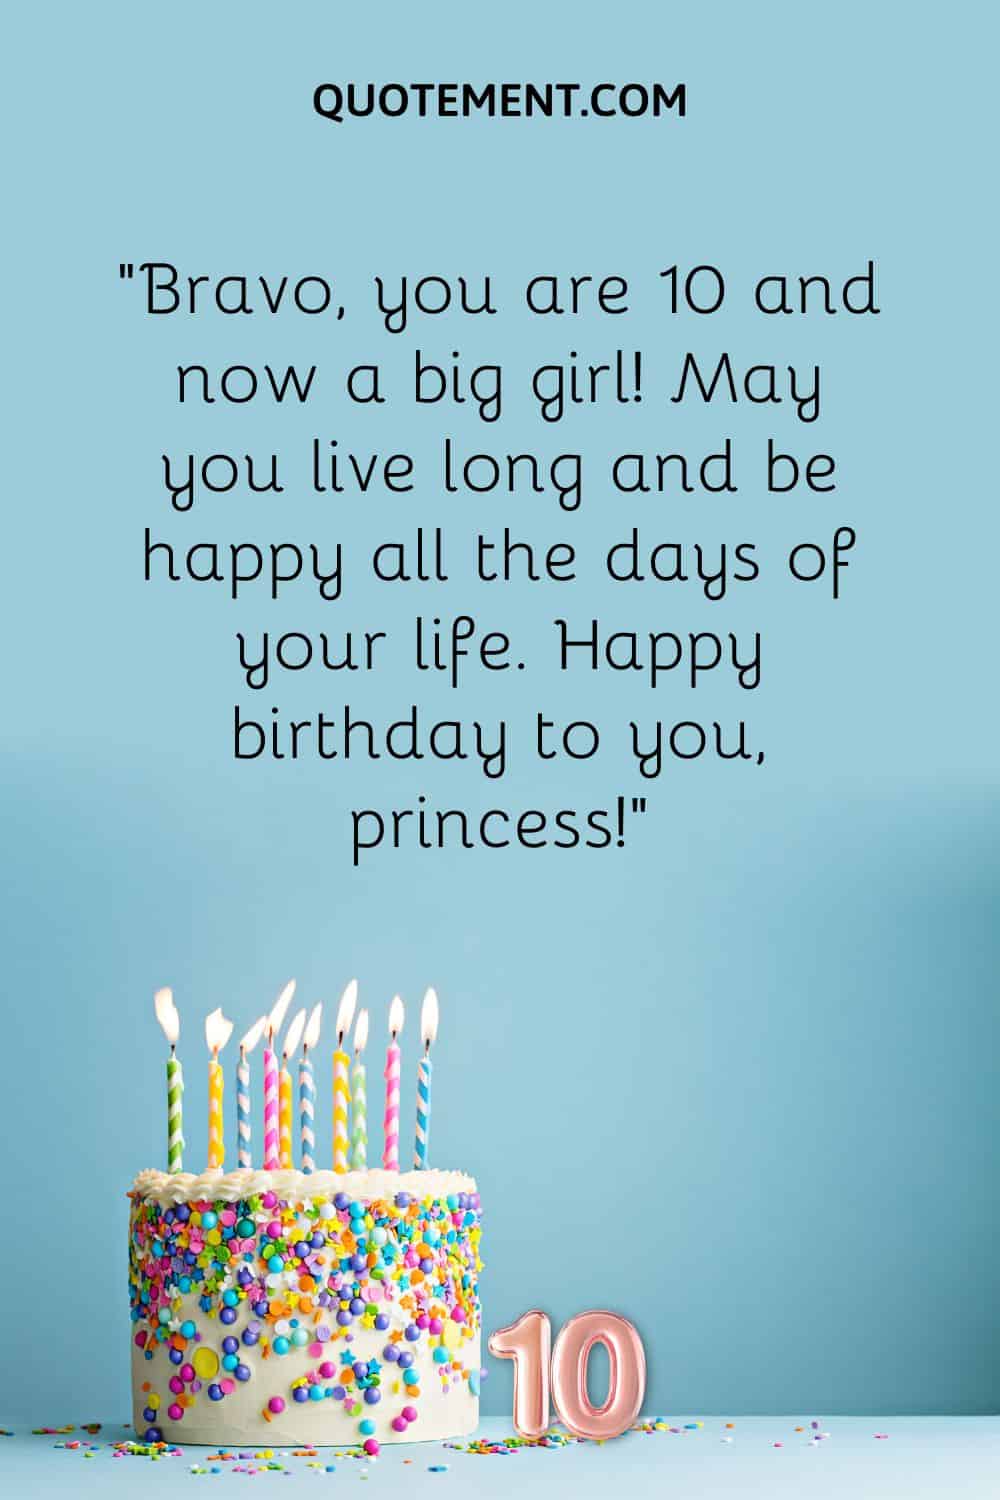 “Bravo, you are 10 and now a big girl! May you live long and be happy all the days of your life. Happy birthday to you, princess!”